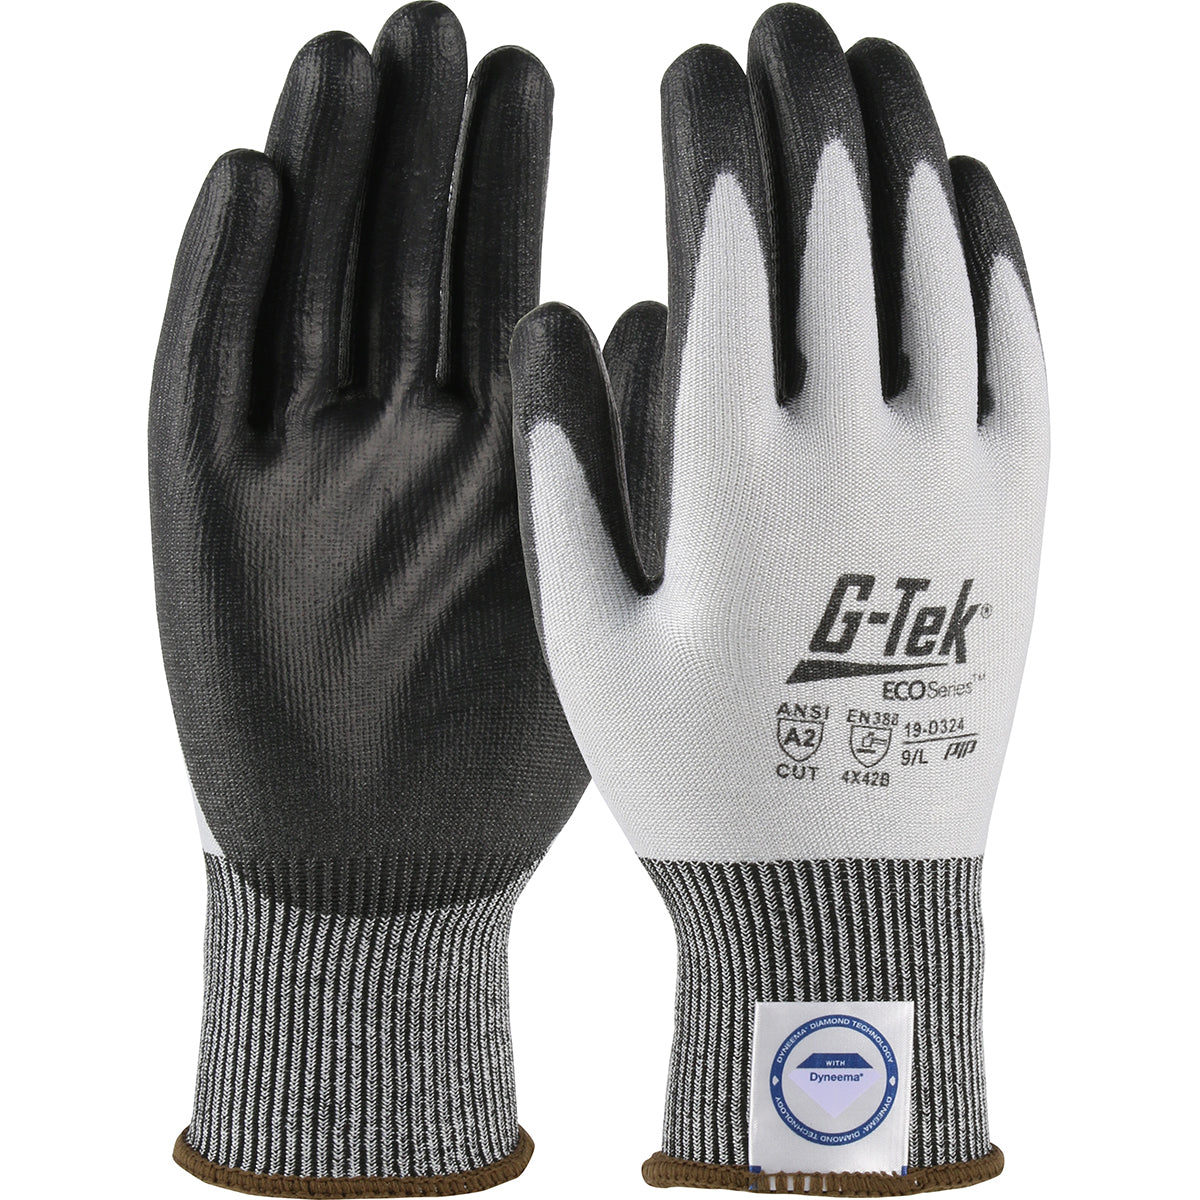 Divert landfill with these sustainable G-Tek® 19-D324 ECO Series™ Dyneema® PU coated cut level A2 industrial work safety gloves from PIP® - uses the latest in bio-based and recycled fiber technologies derived from discarded P.E.T. bottles.